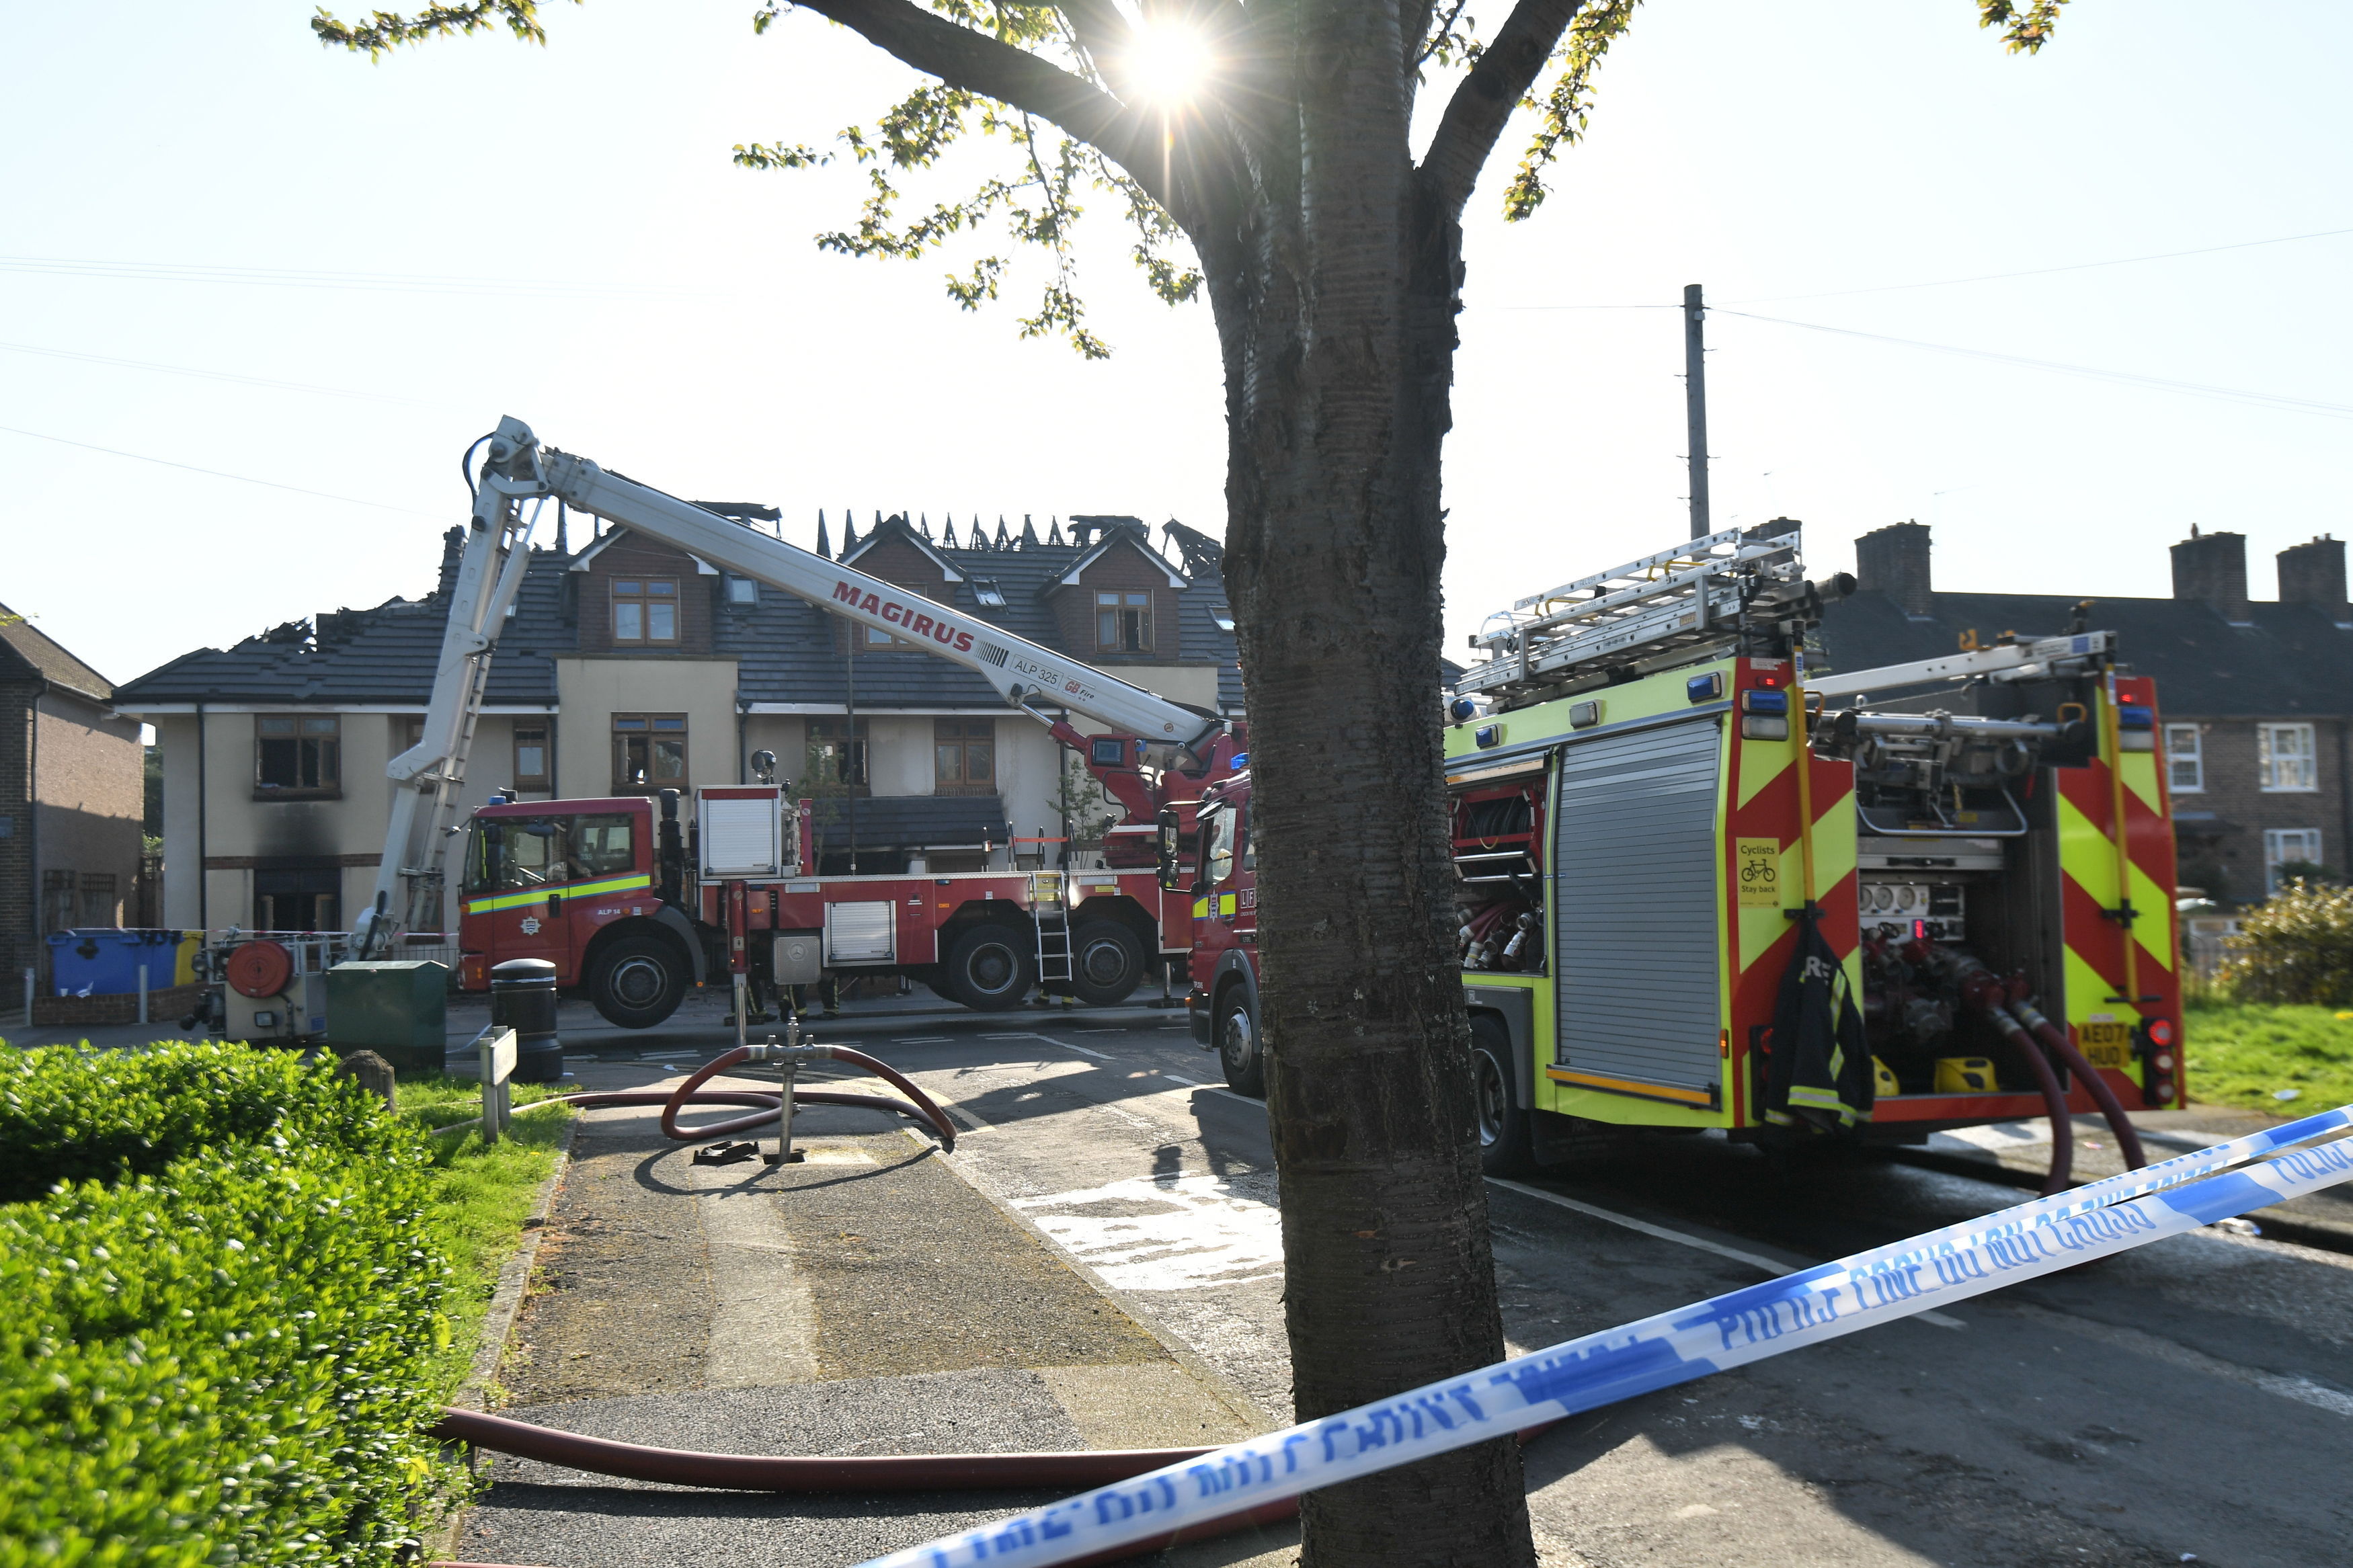 Emergency services attend the scene of a fire at a care home in Chingford (Victoria Jones/PA)